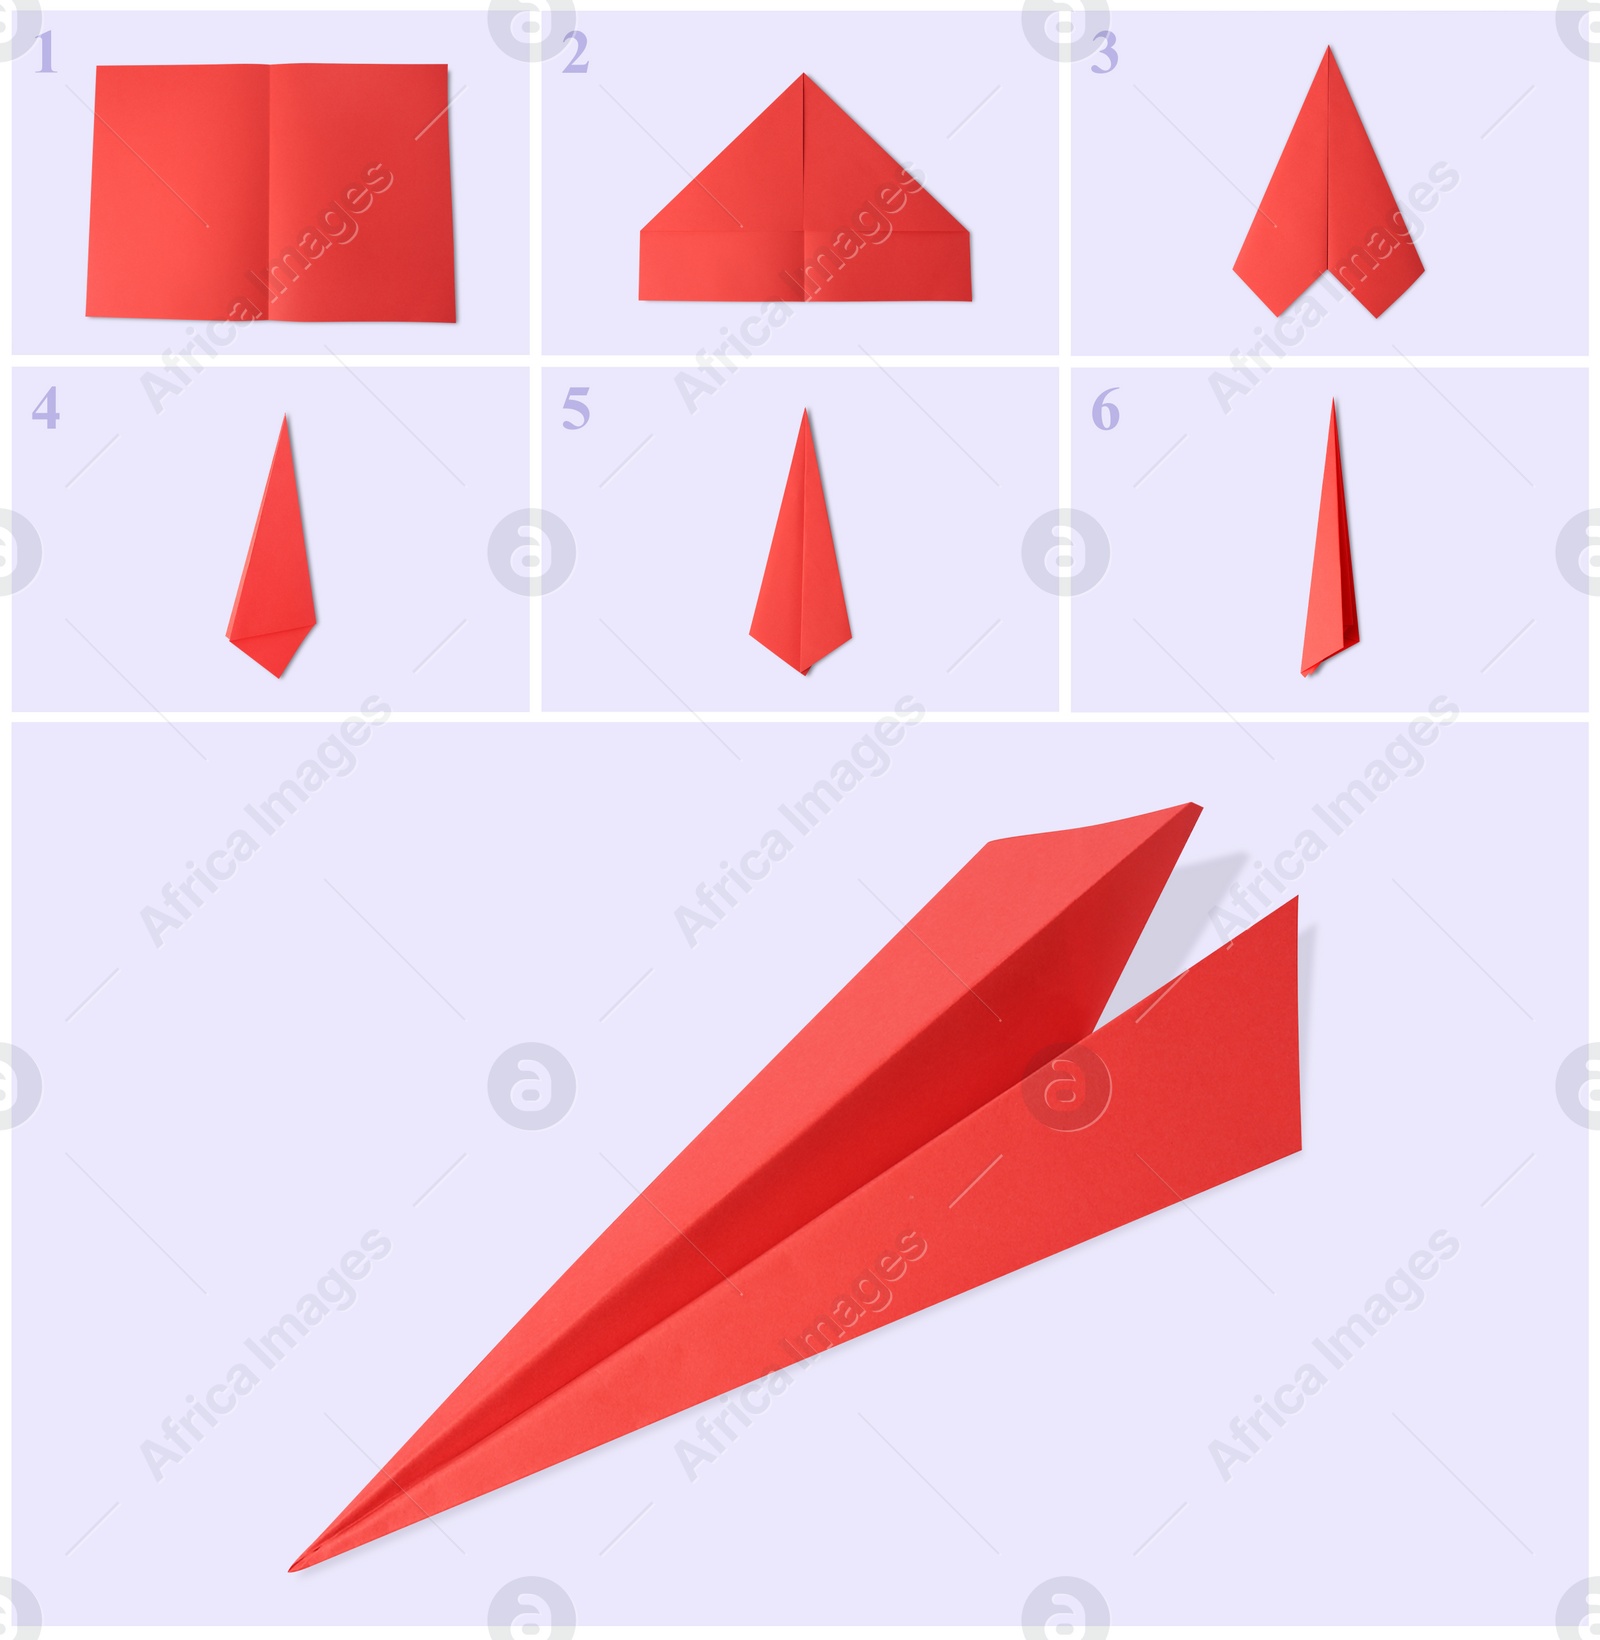 Image of Origami art. Making red paper plane step by step, photo collage on white background